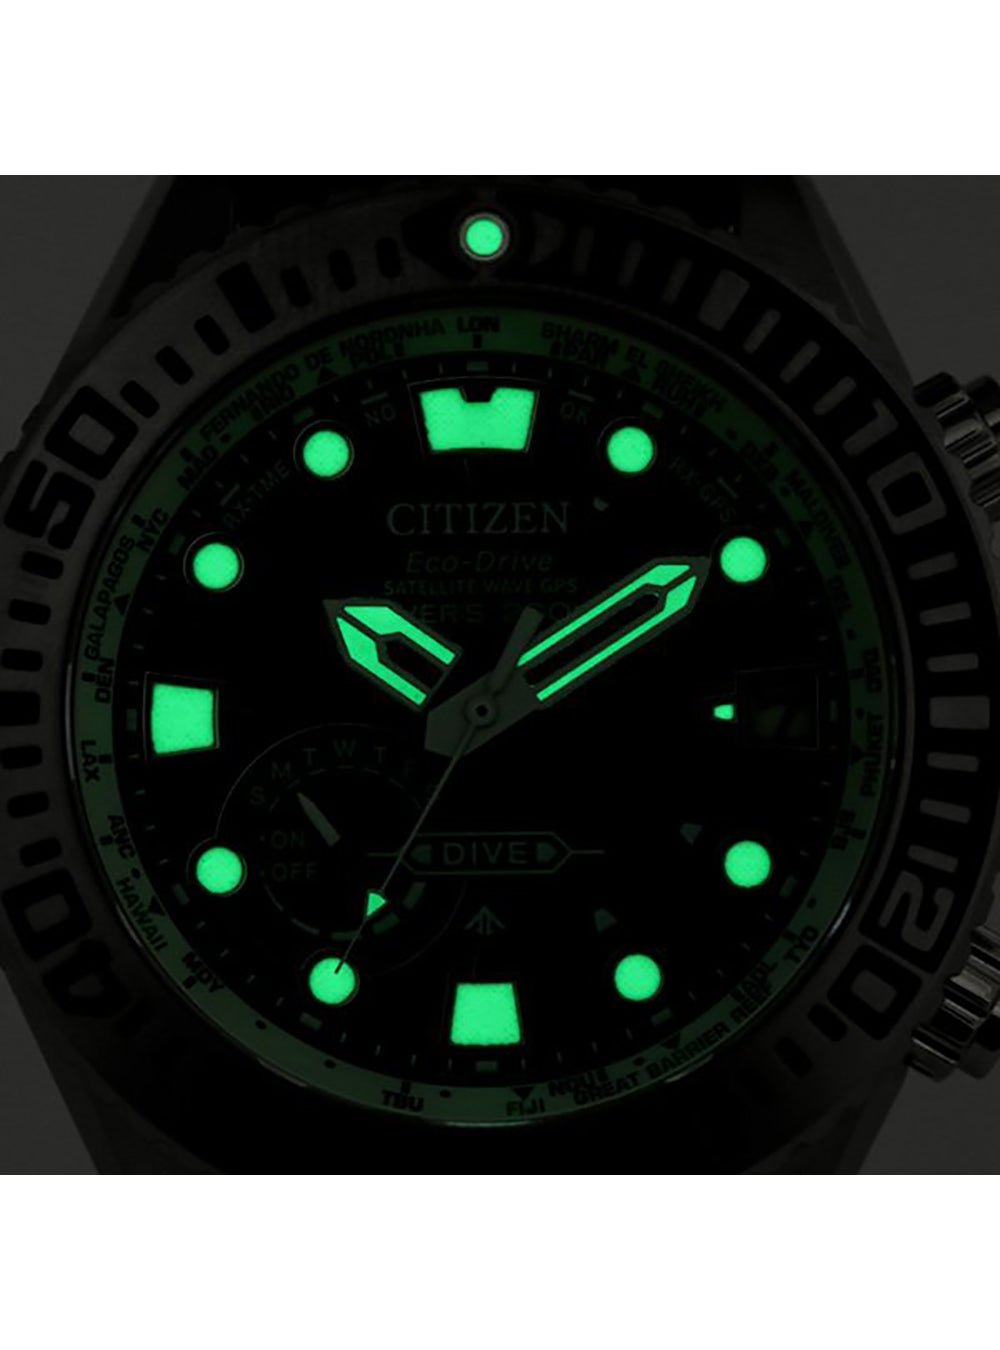 CITIZEN PROMASTER ECO-DRIVE SATELLITE WAVE GPS DIVER'S CC5001-00W MADE IN JAPAN JDMWRISTWATCHjapan-select